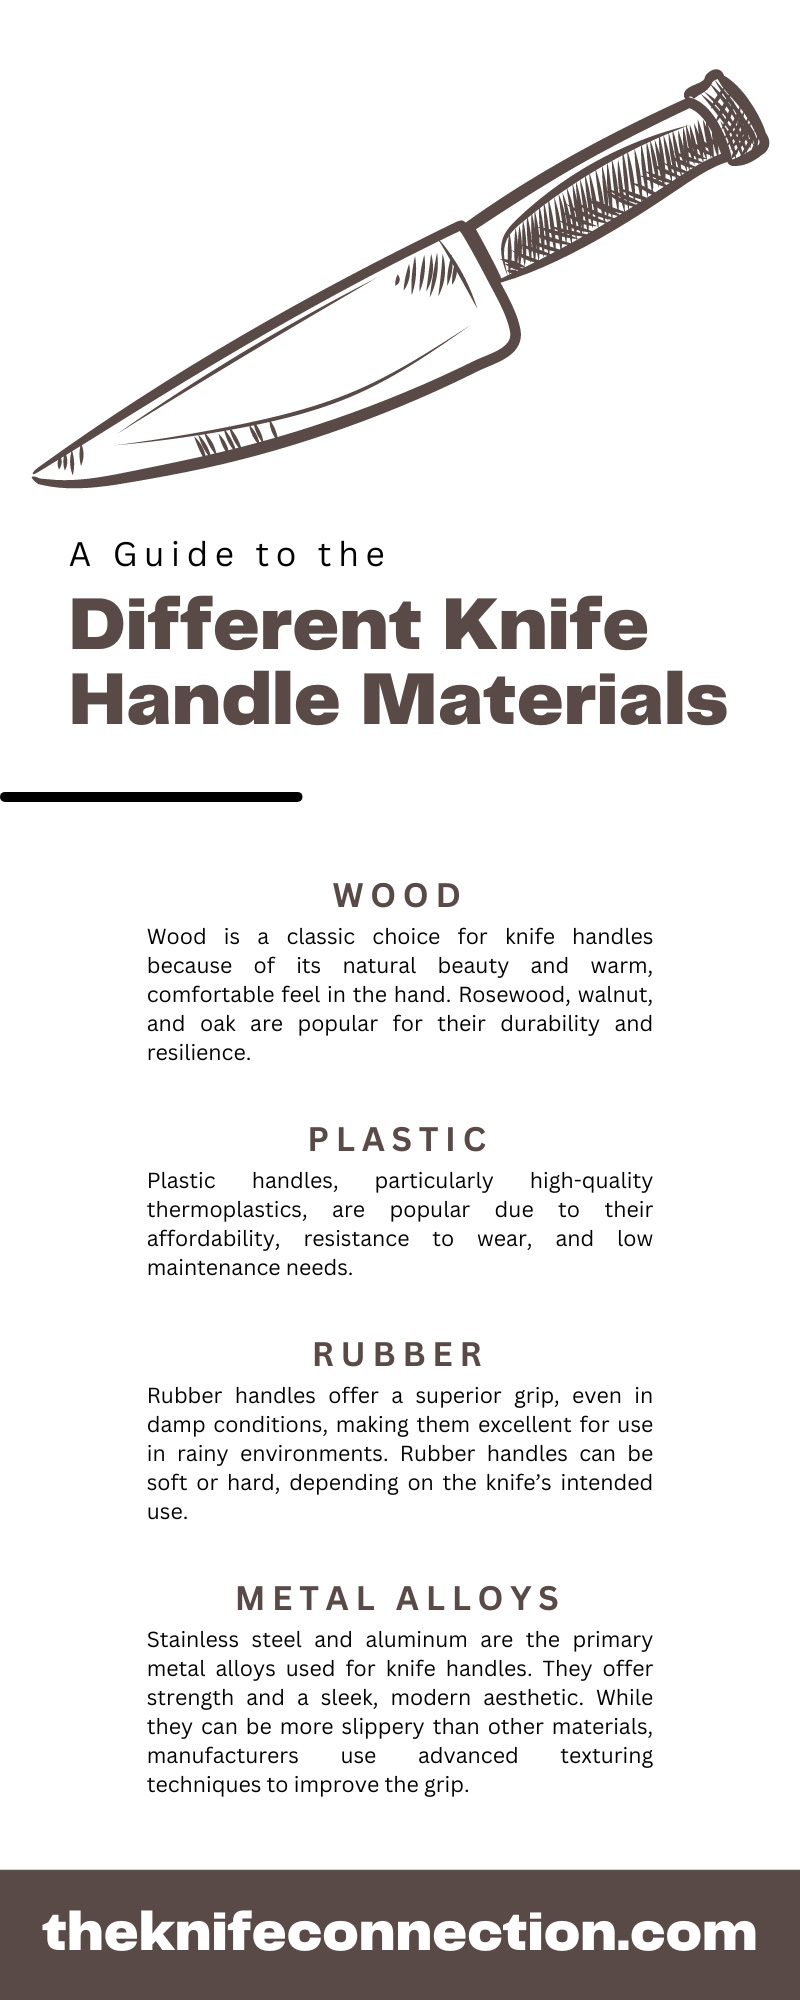 A Guide to the Different Knife Handle Materials